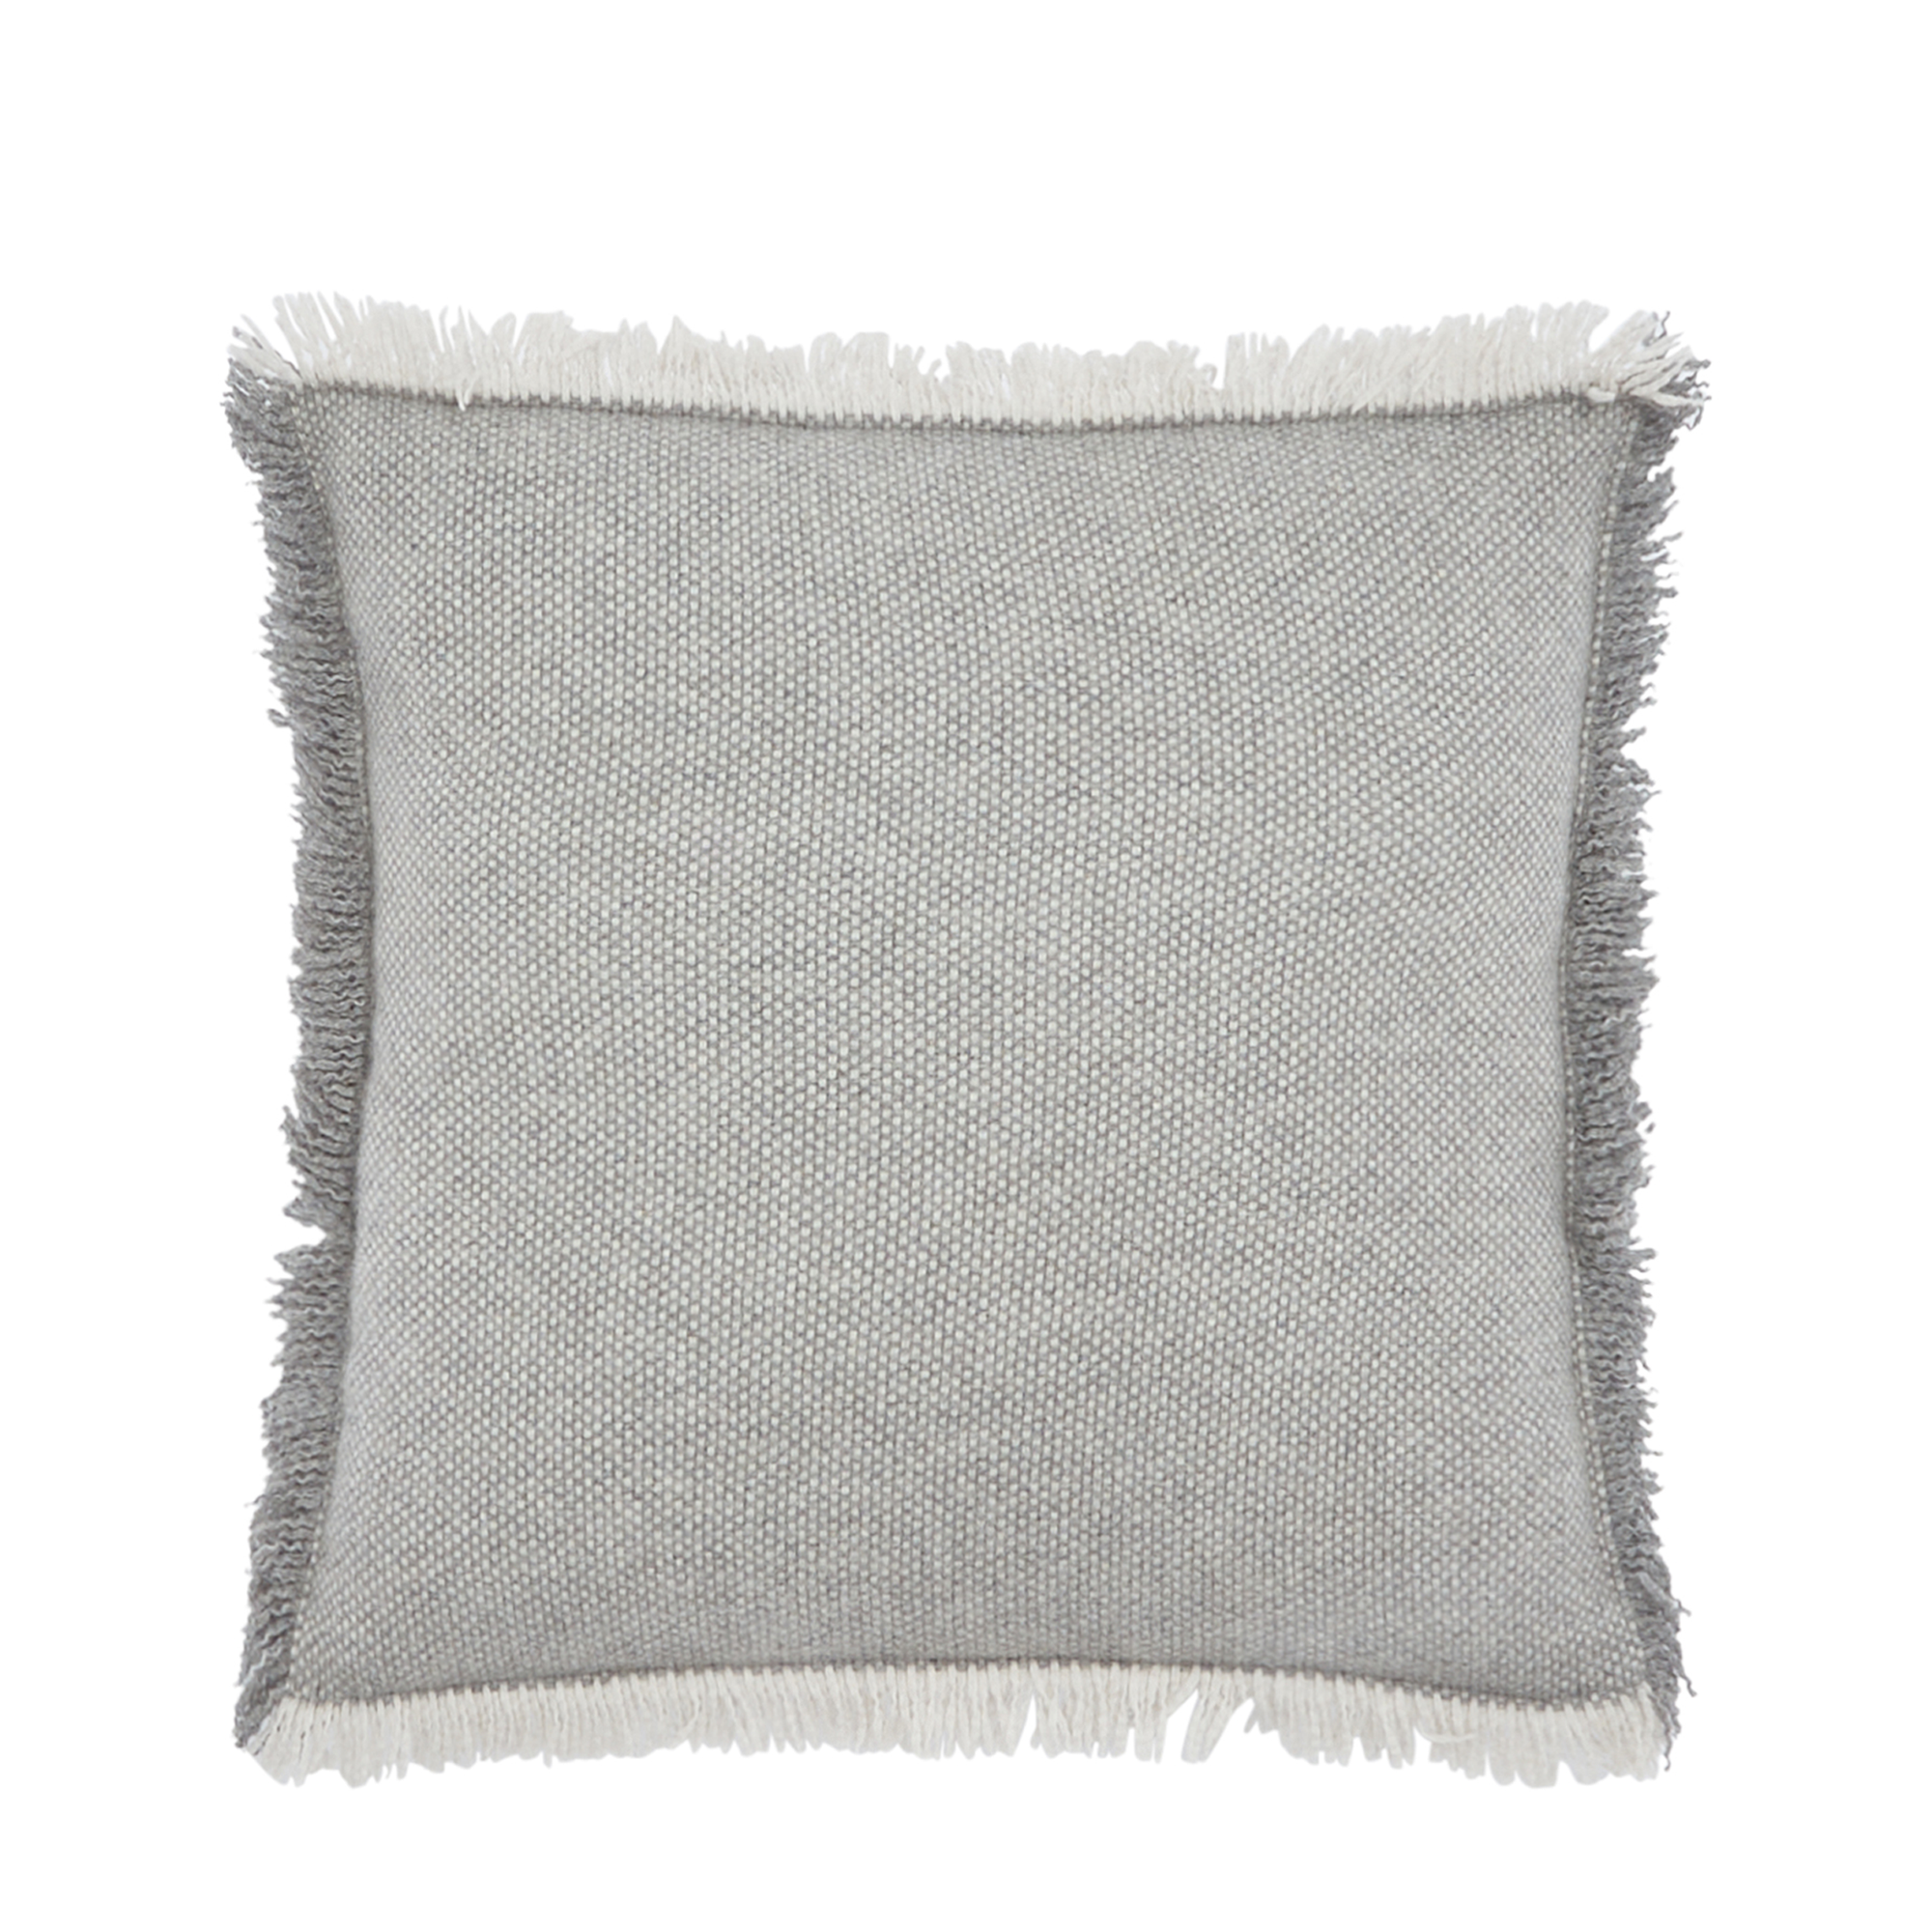 Grey cashmere cushion with a knitted effect and hand-fringed hem, offering a luxurious and textured accent for any space.